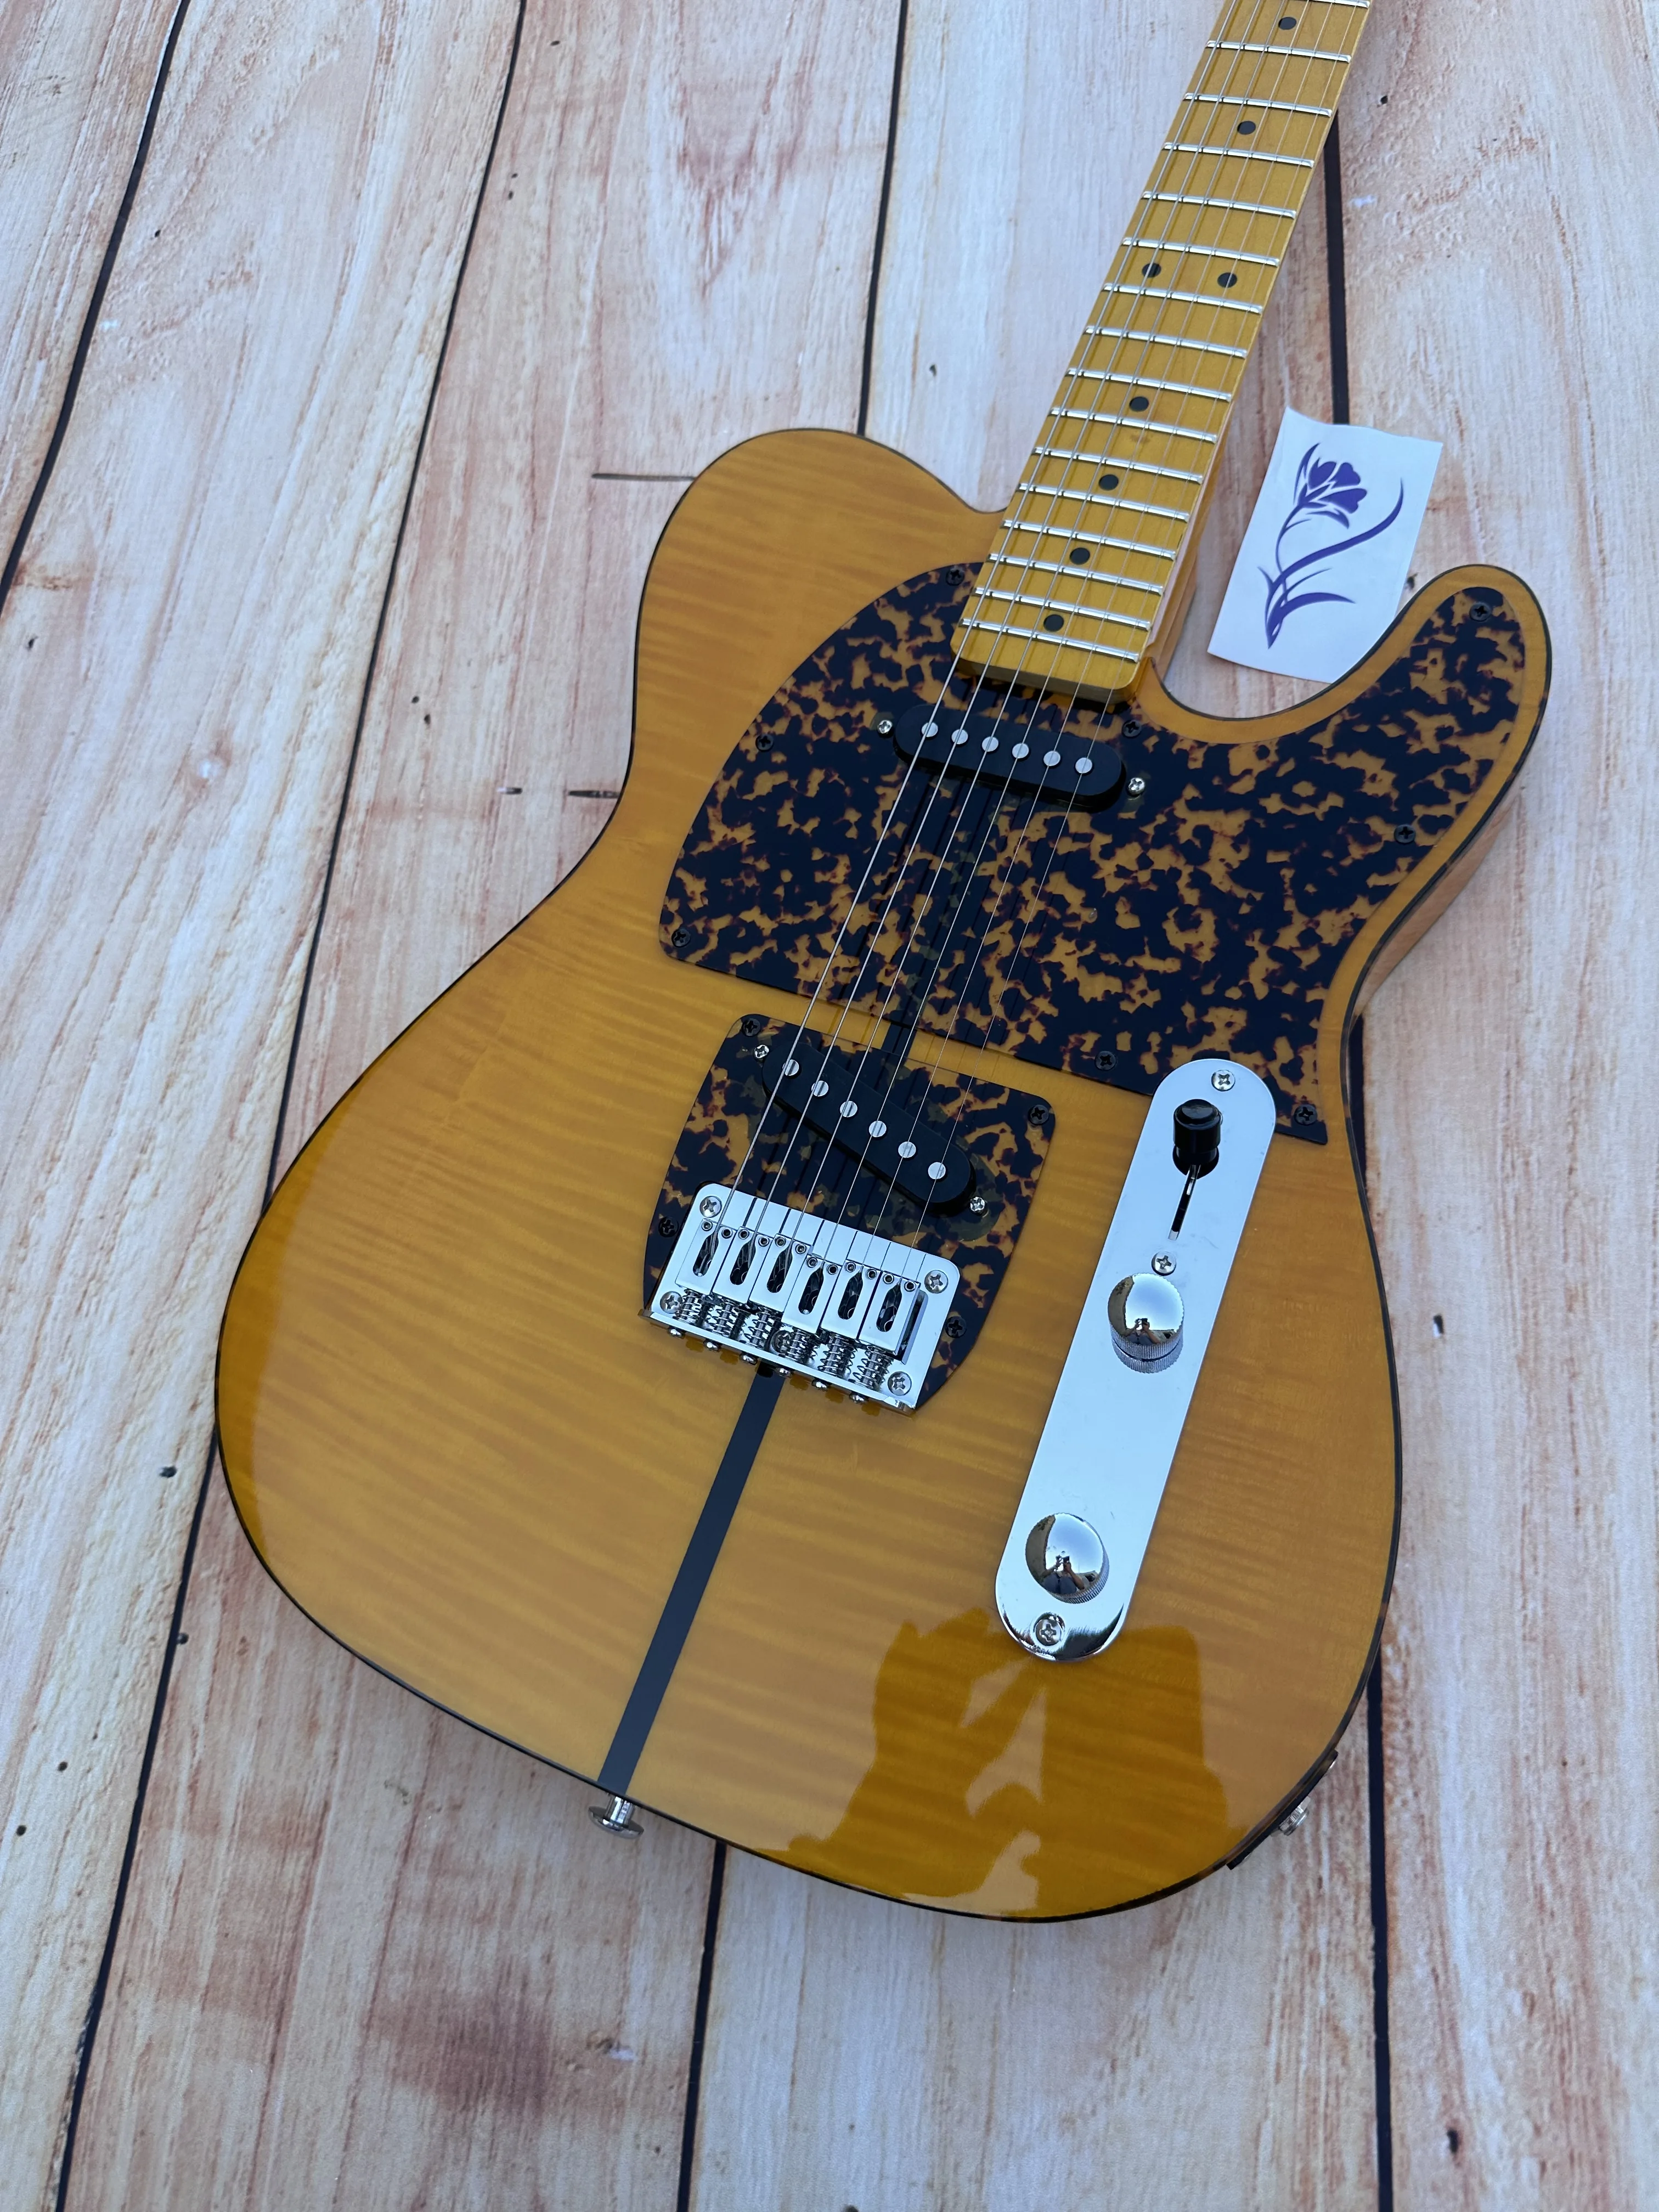 

Prince HS Anderson & Hohner Madcat Mad Cat Tele Amber Yellow Flame Maple Top Electric Guitar Leopard Pickguard & Body Binding gu